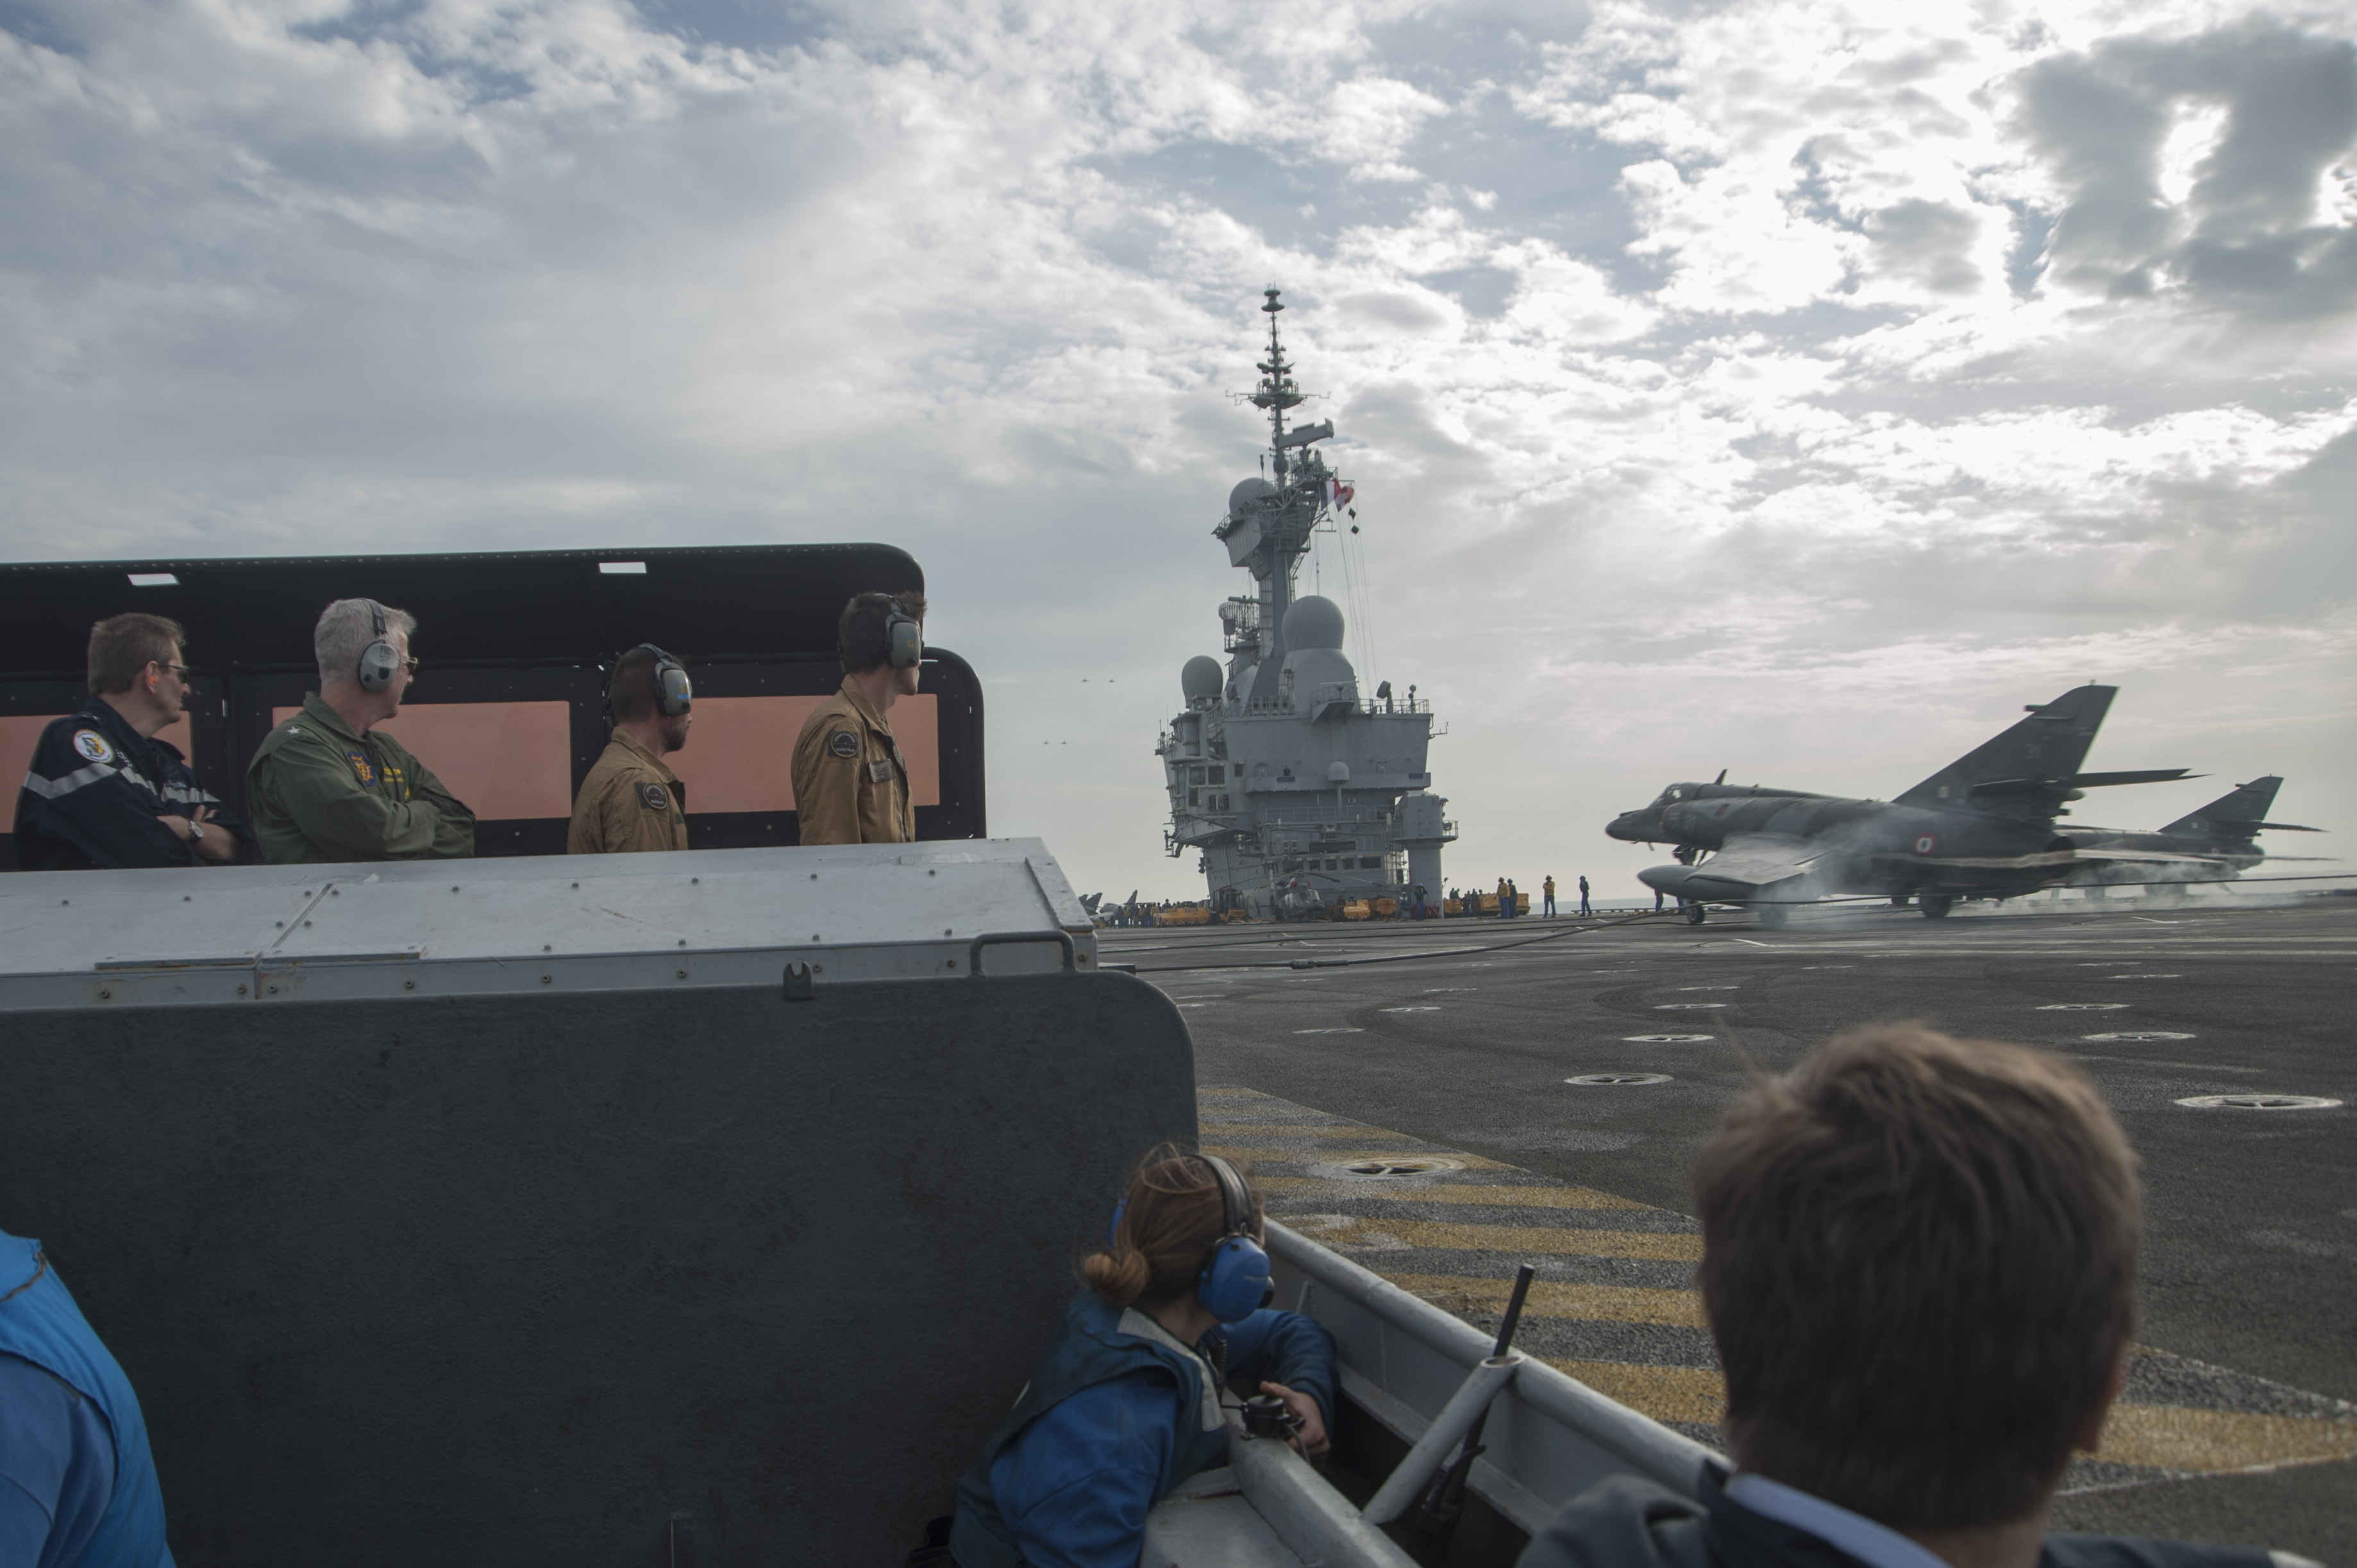 Rear Adm. Eric Chaperon, commander, French Navy Task Force 473, left, and Rear Adm. Kevin Sweeney, Commander, Harry S. Truman Carrier Strike Group 10on the flight deck of the French aircraft carrier Charles de Gaulle (R9) in 2014. US Navy Photo